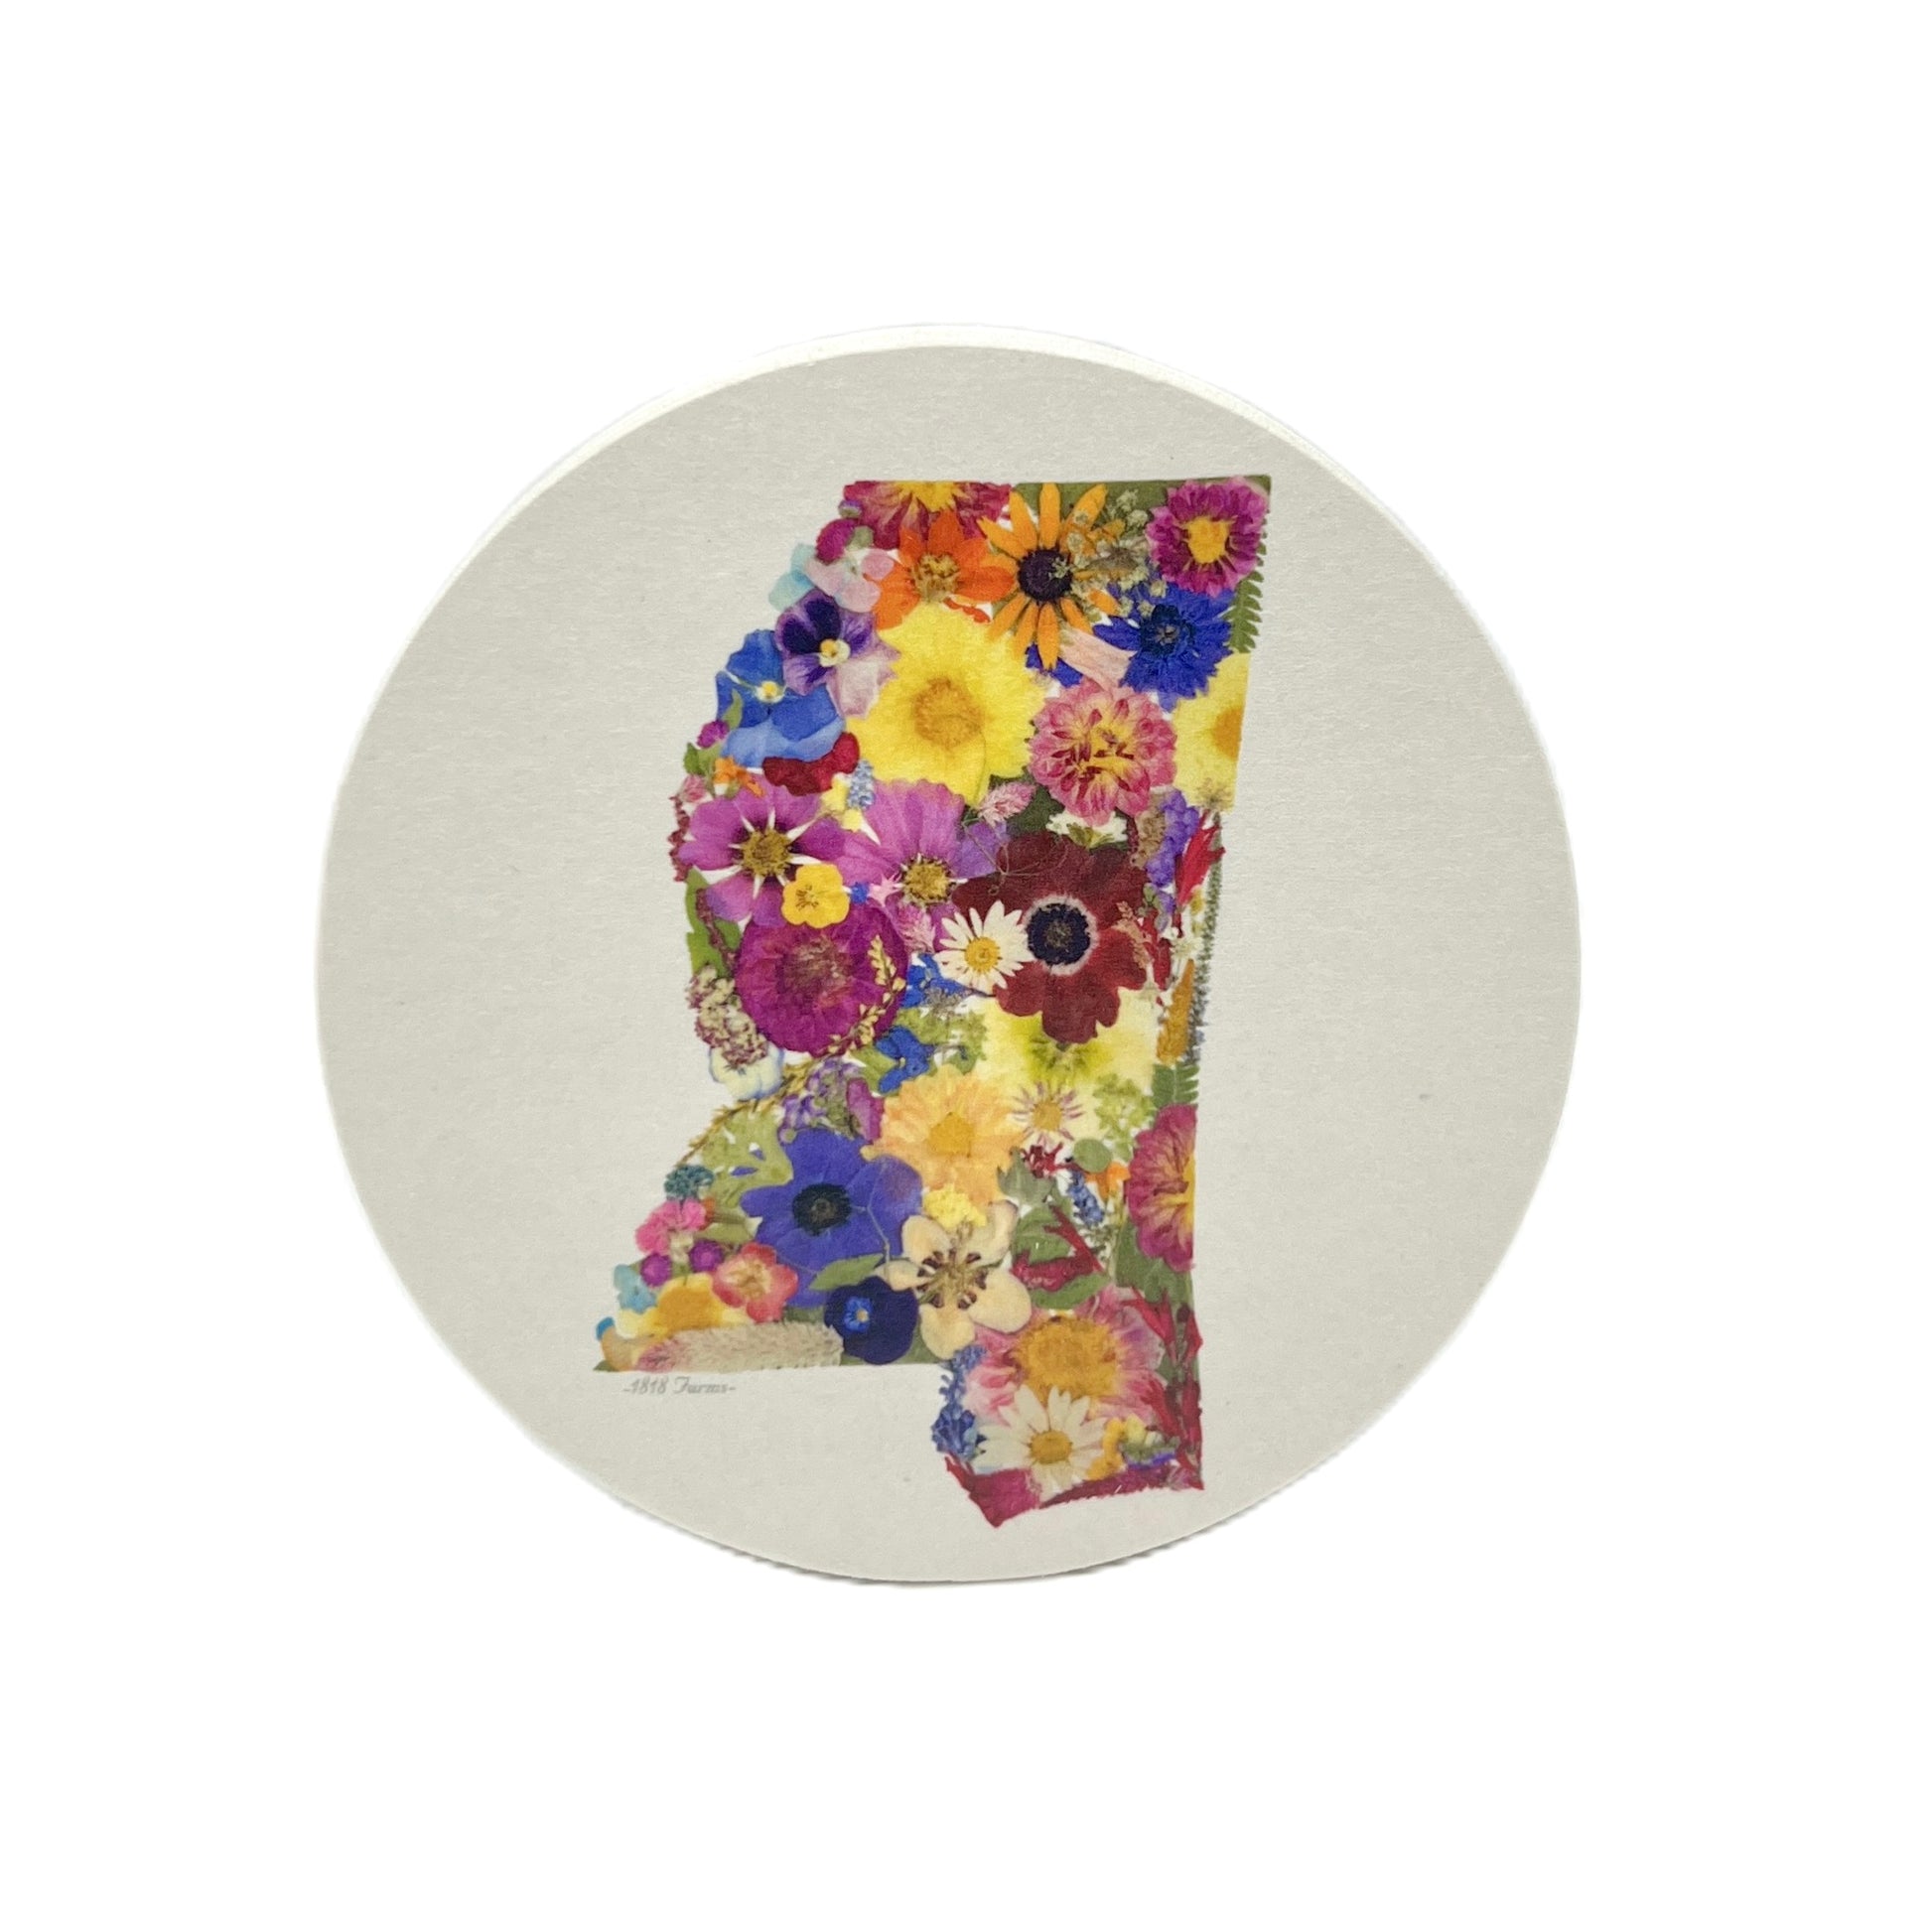 Mississippi Themed Coasters (Set of 6) Featuring Dried, Pressed Flowers - "Where I Bloom" Collection Coaster 1818 Farms   